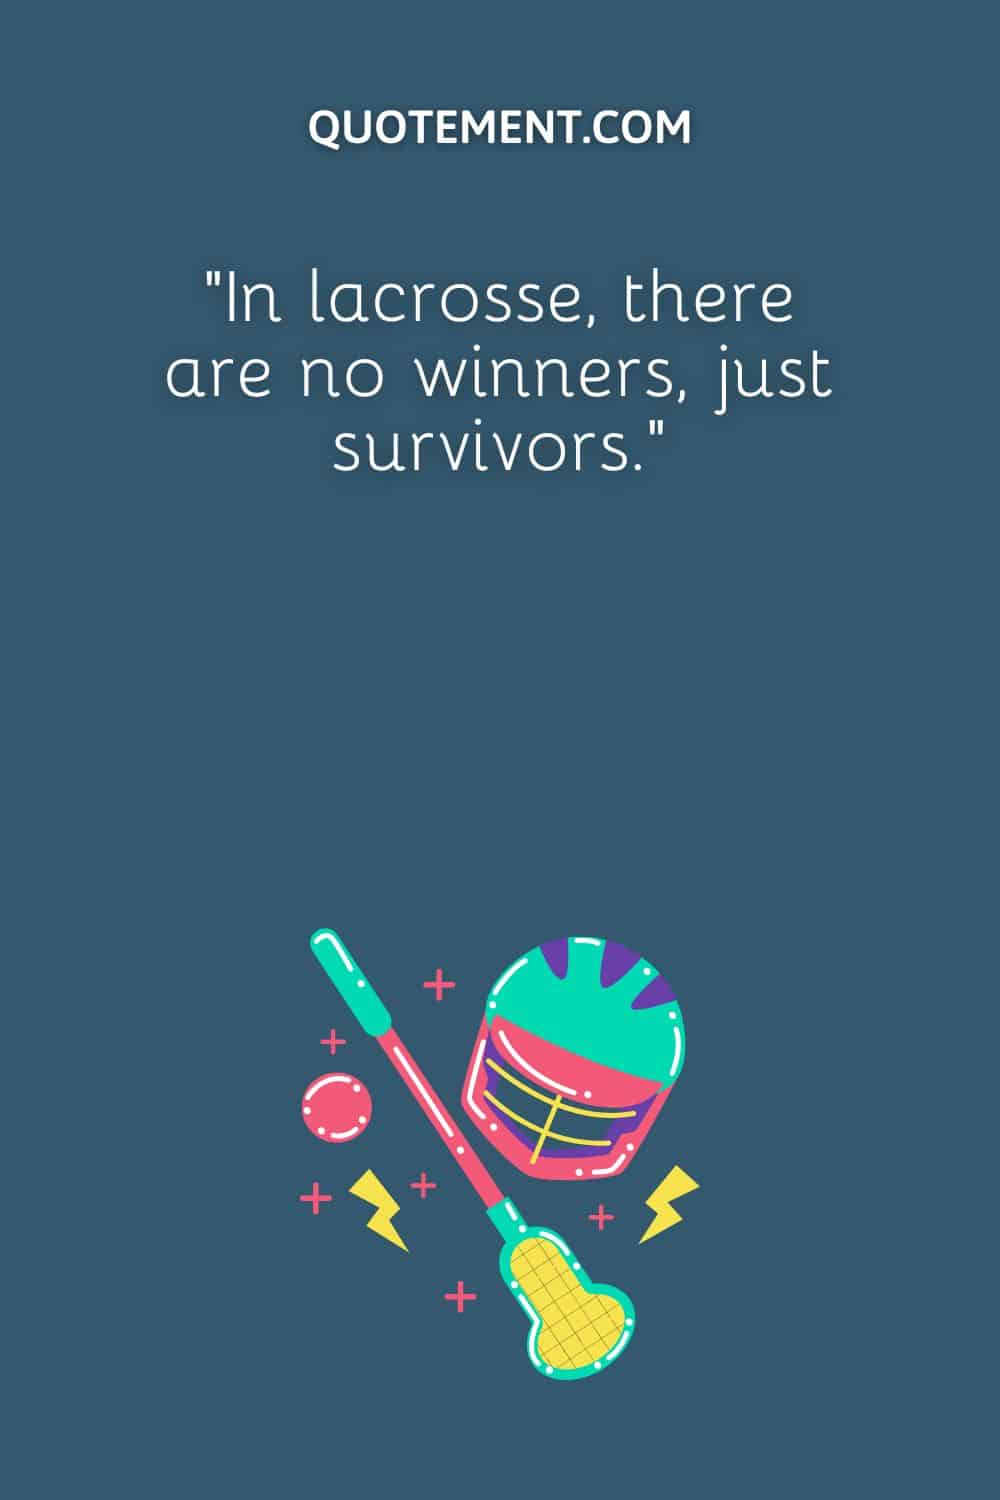 “In lacrosse, there are no winners, just survivors.”